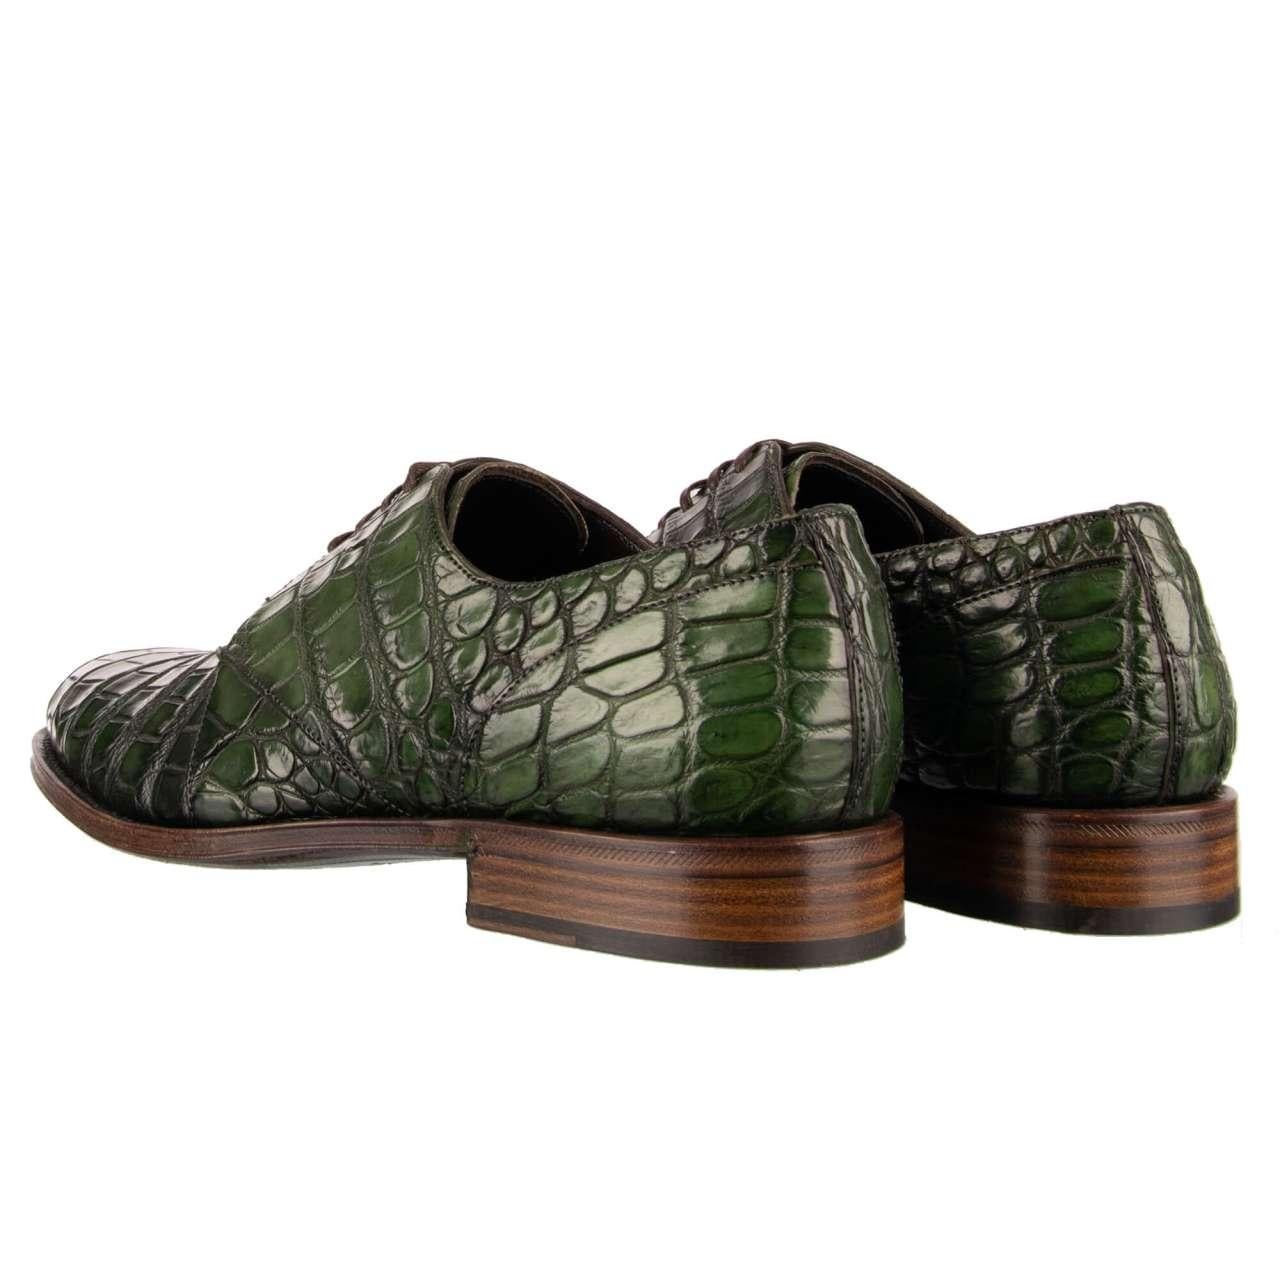 Dolce & Gabbana Formal Crocodile Leather Shoes NAPOLI Good Year Green EUR 39 In Excellent Condition For Sale In Erkrath, DE